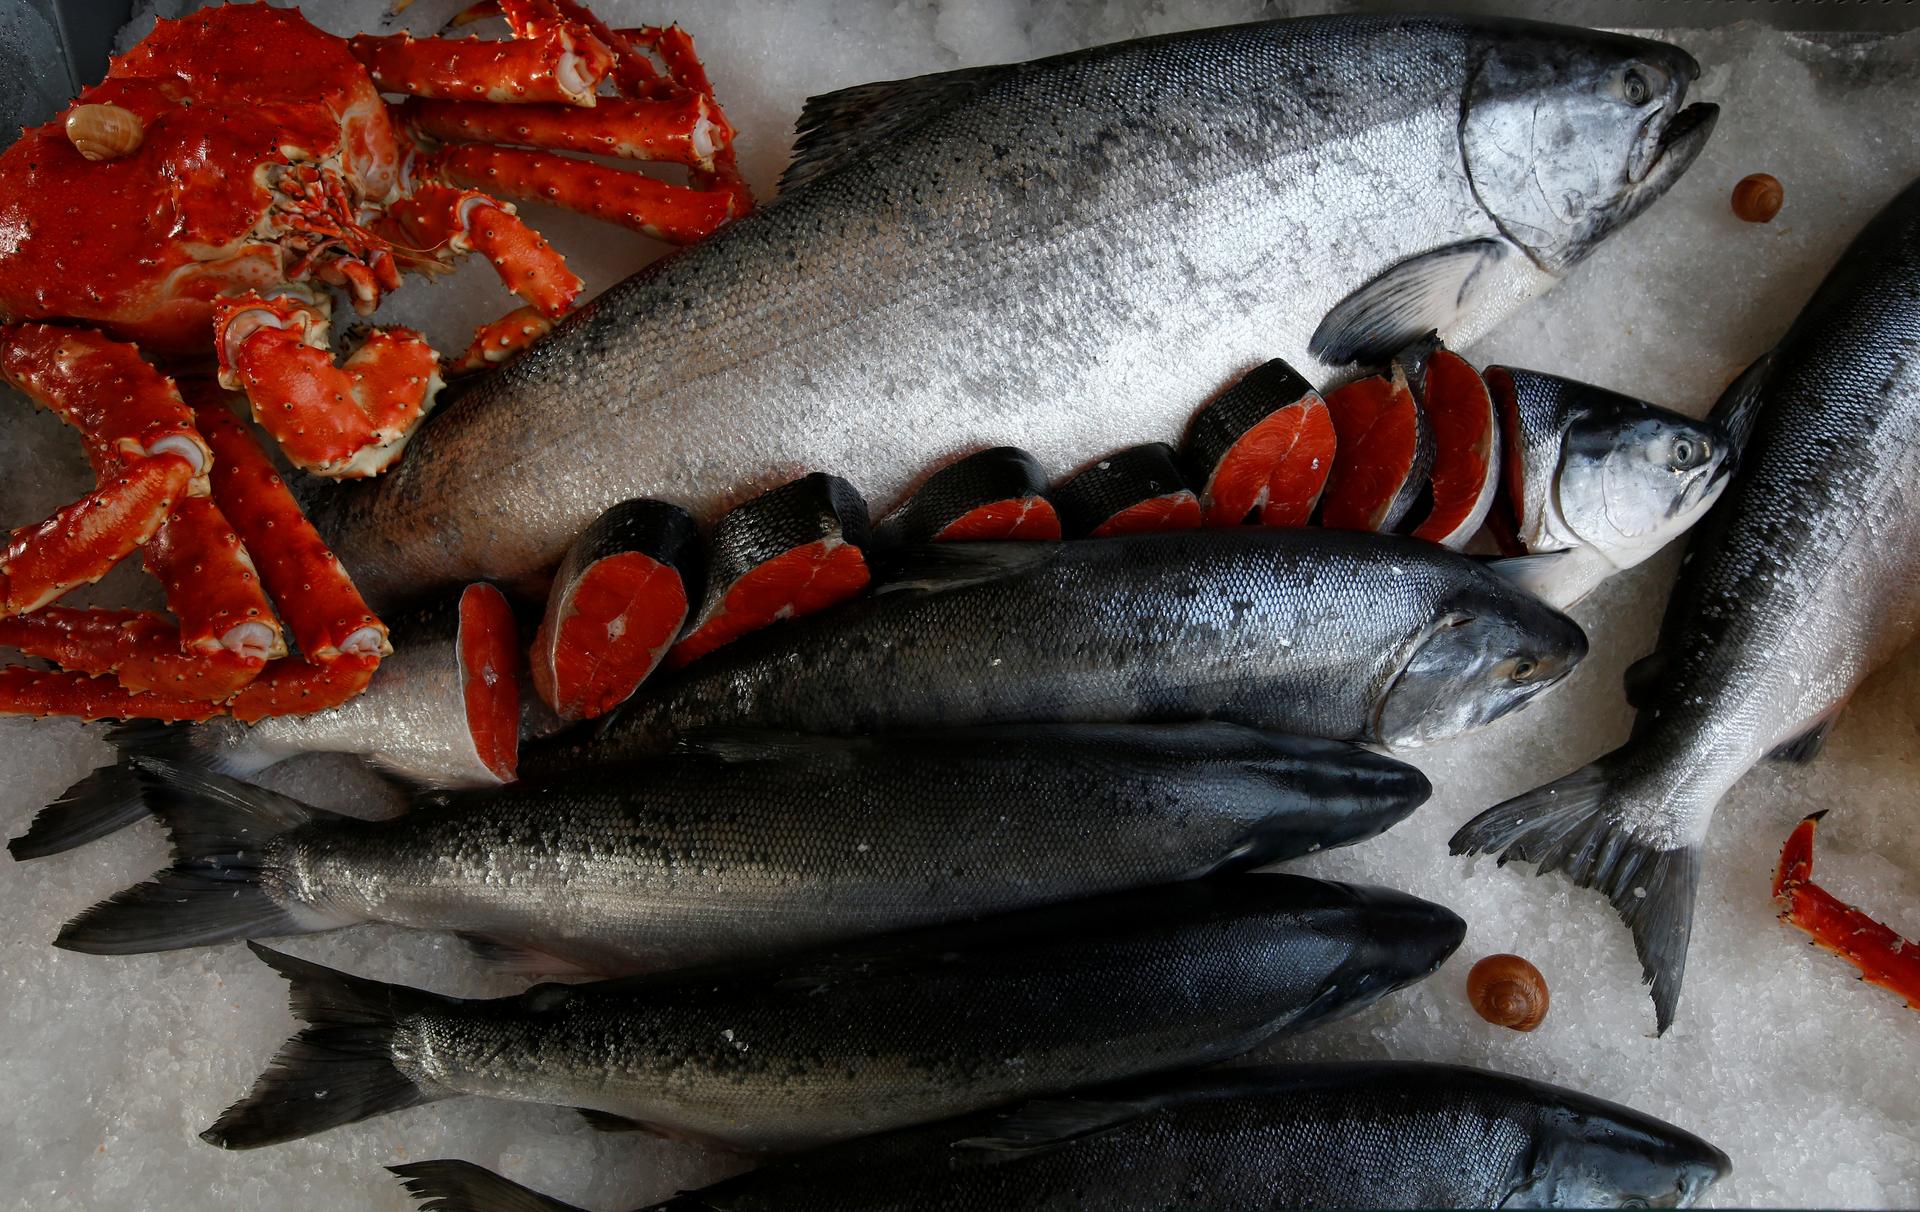 Fish and seafood are on display in Vladivostok, Russia, Sept. 6, 2017.